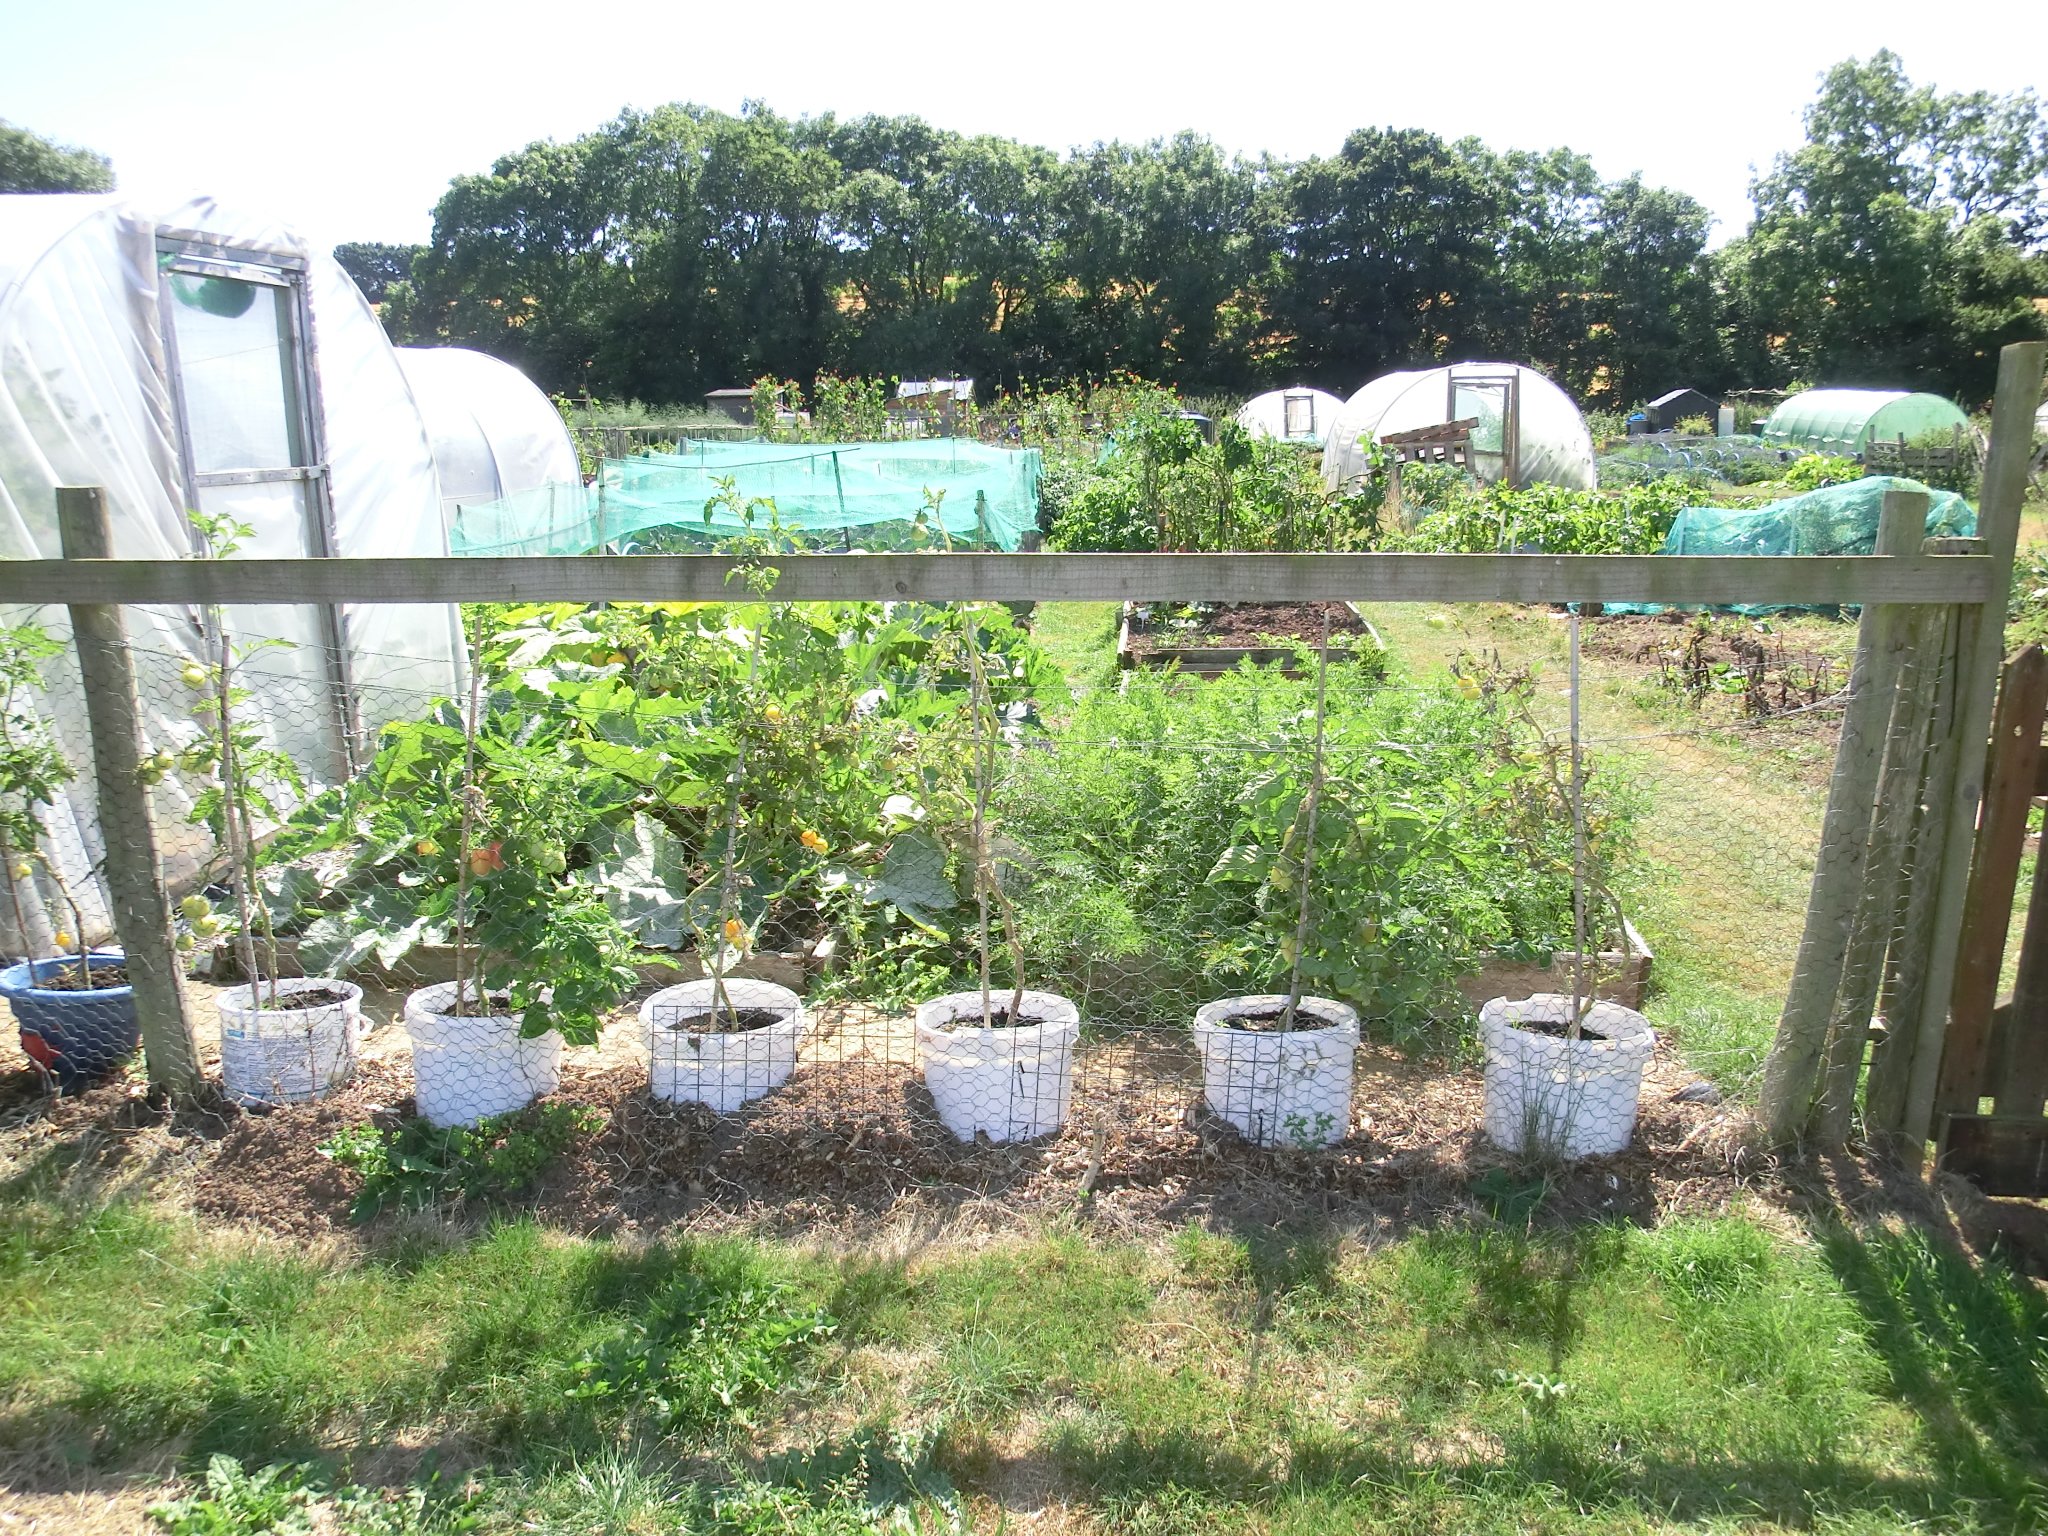 National Allotments Week! Read on to find out more